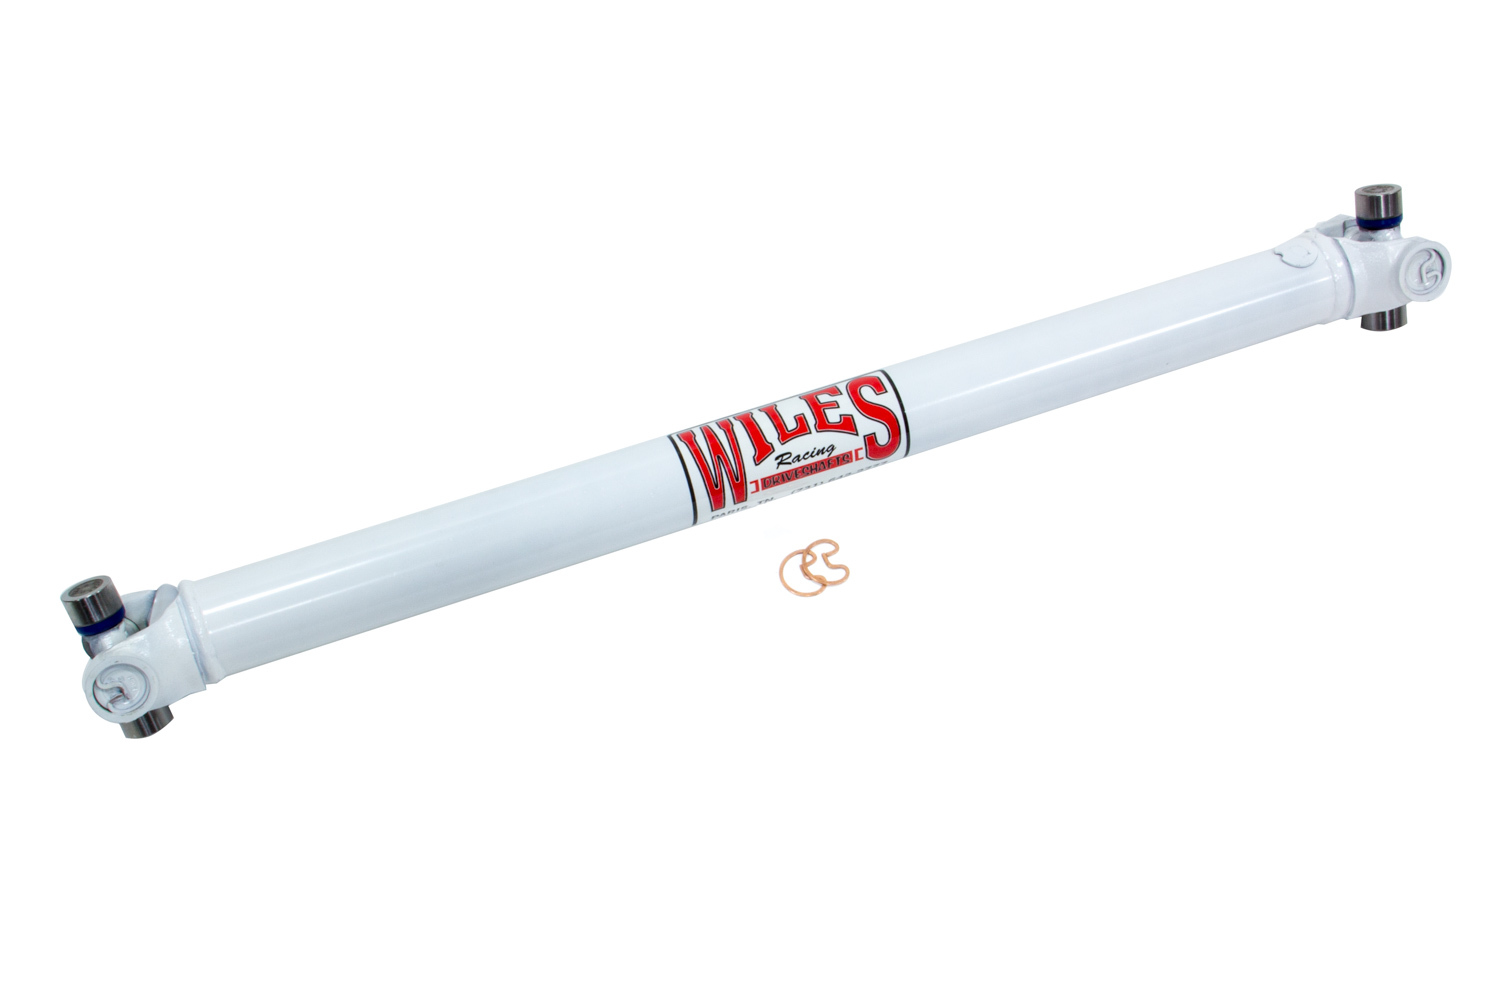 Wiles Driveshaft S283305 Drive Shaft, 30.500 in Long, 2 in OD, 1310 U-Joints, Steel, White Paint, Universal, Each